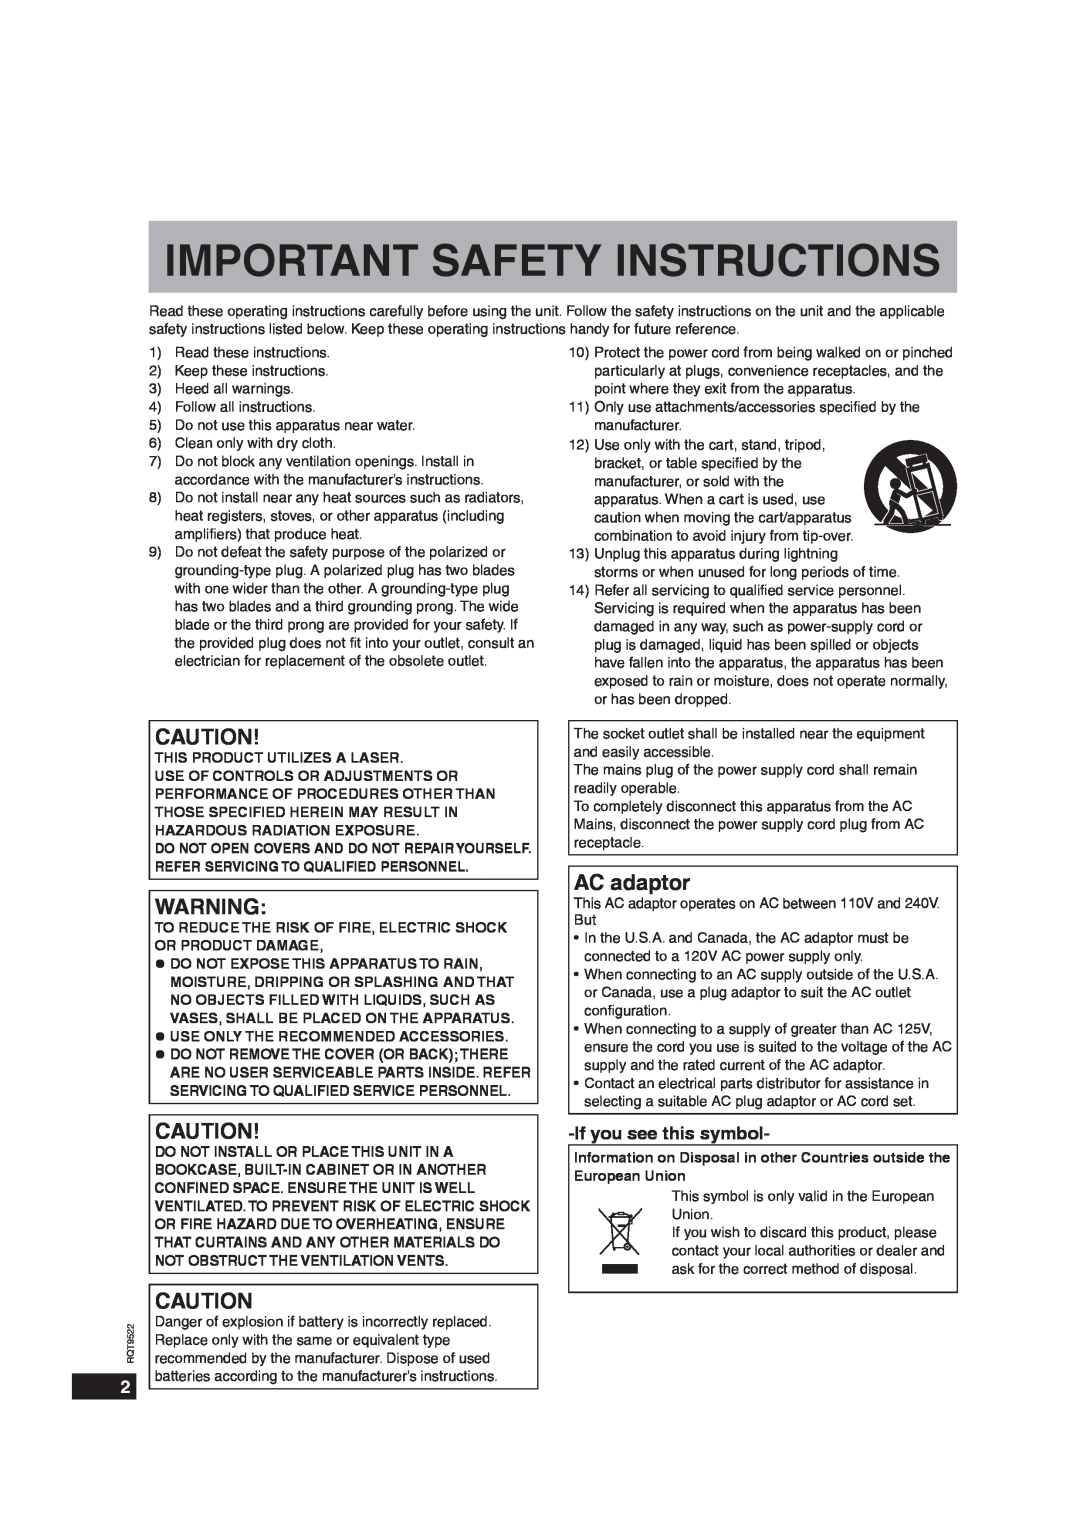 Panasonic MW-10 operating instructions AC adaptor, Ifyou see this symbol, Important Safety Instructions 